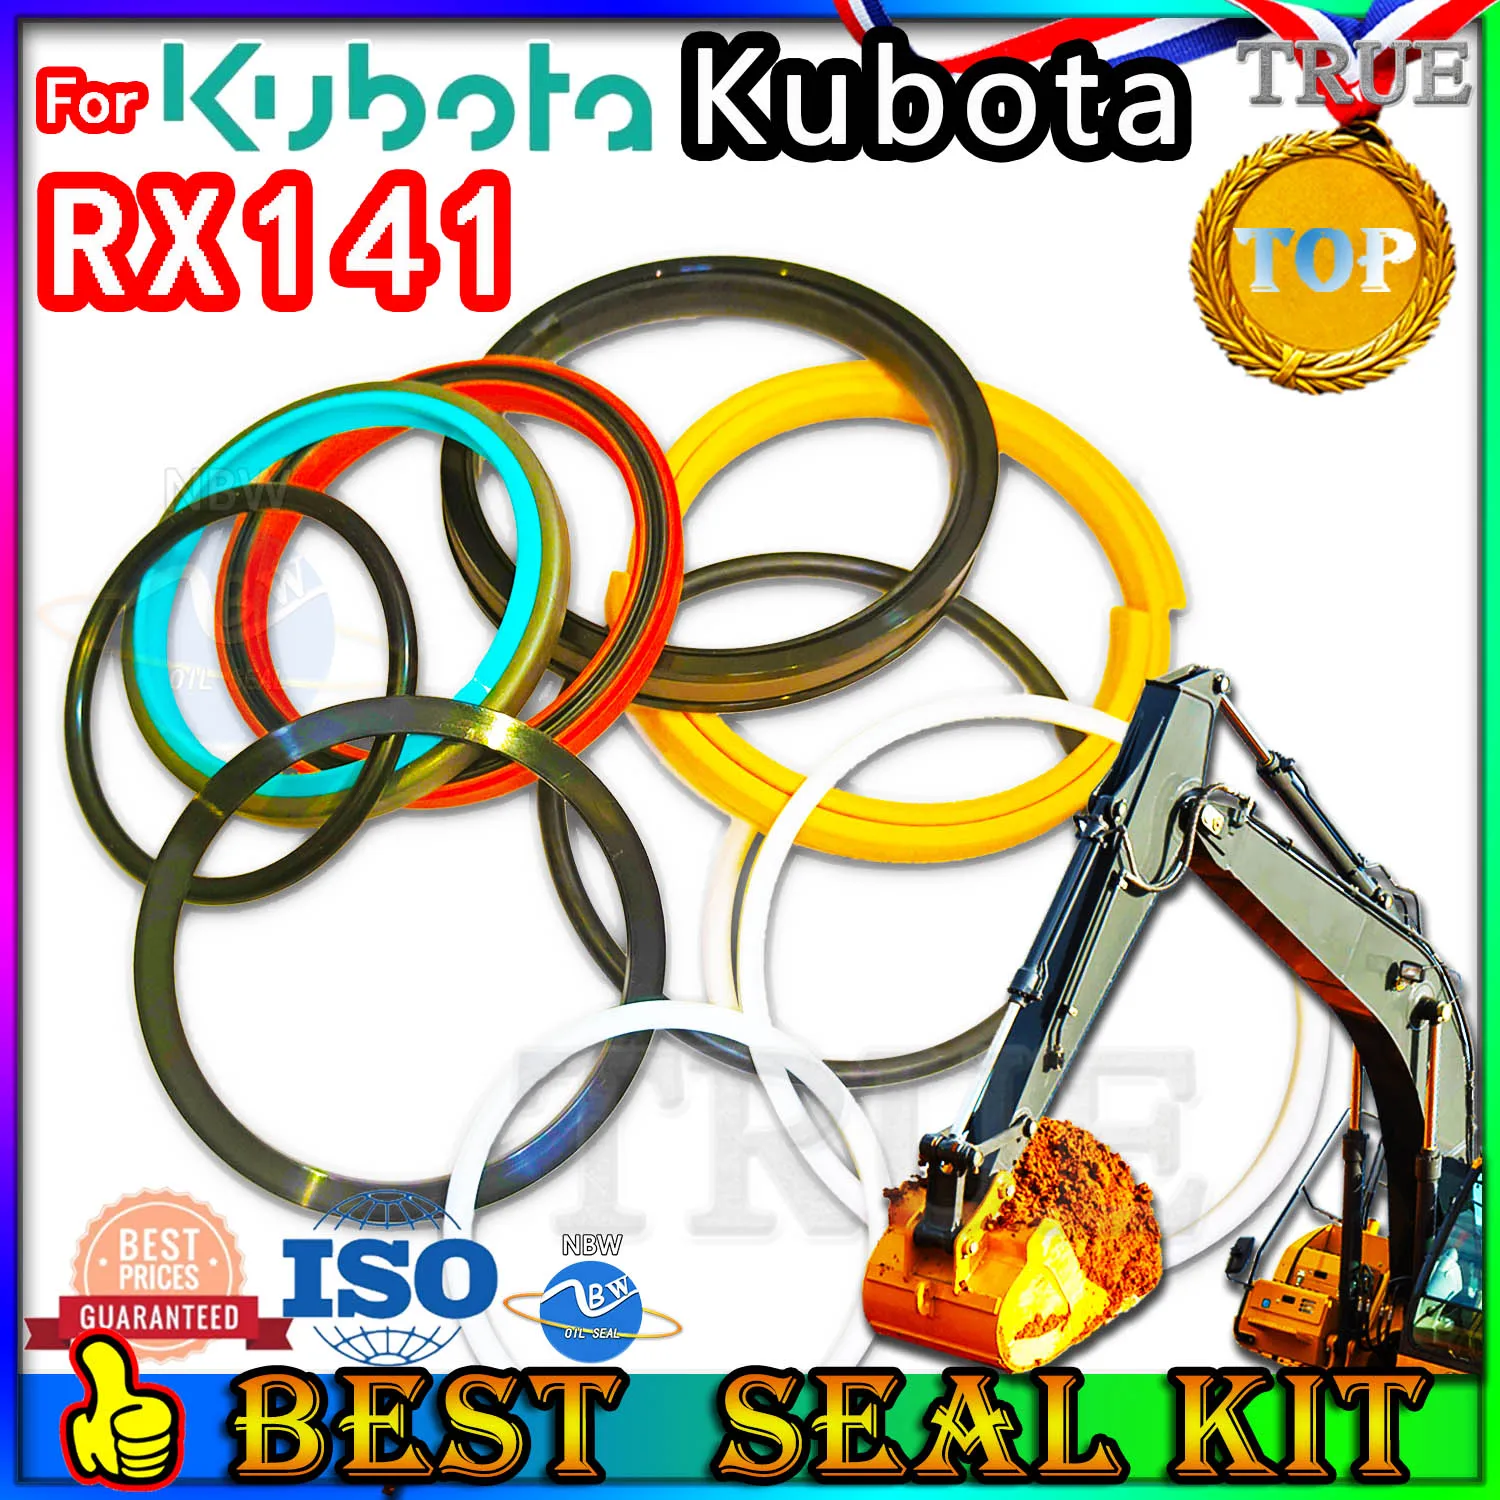 

For Kubota RX141 Oil Seal Repair Kit Boom Arm Bucket Excavator Hydraulic Cylinder Best Reliable Mend proof Center Swivel Pilot